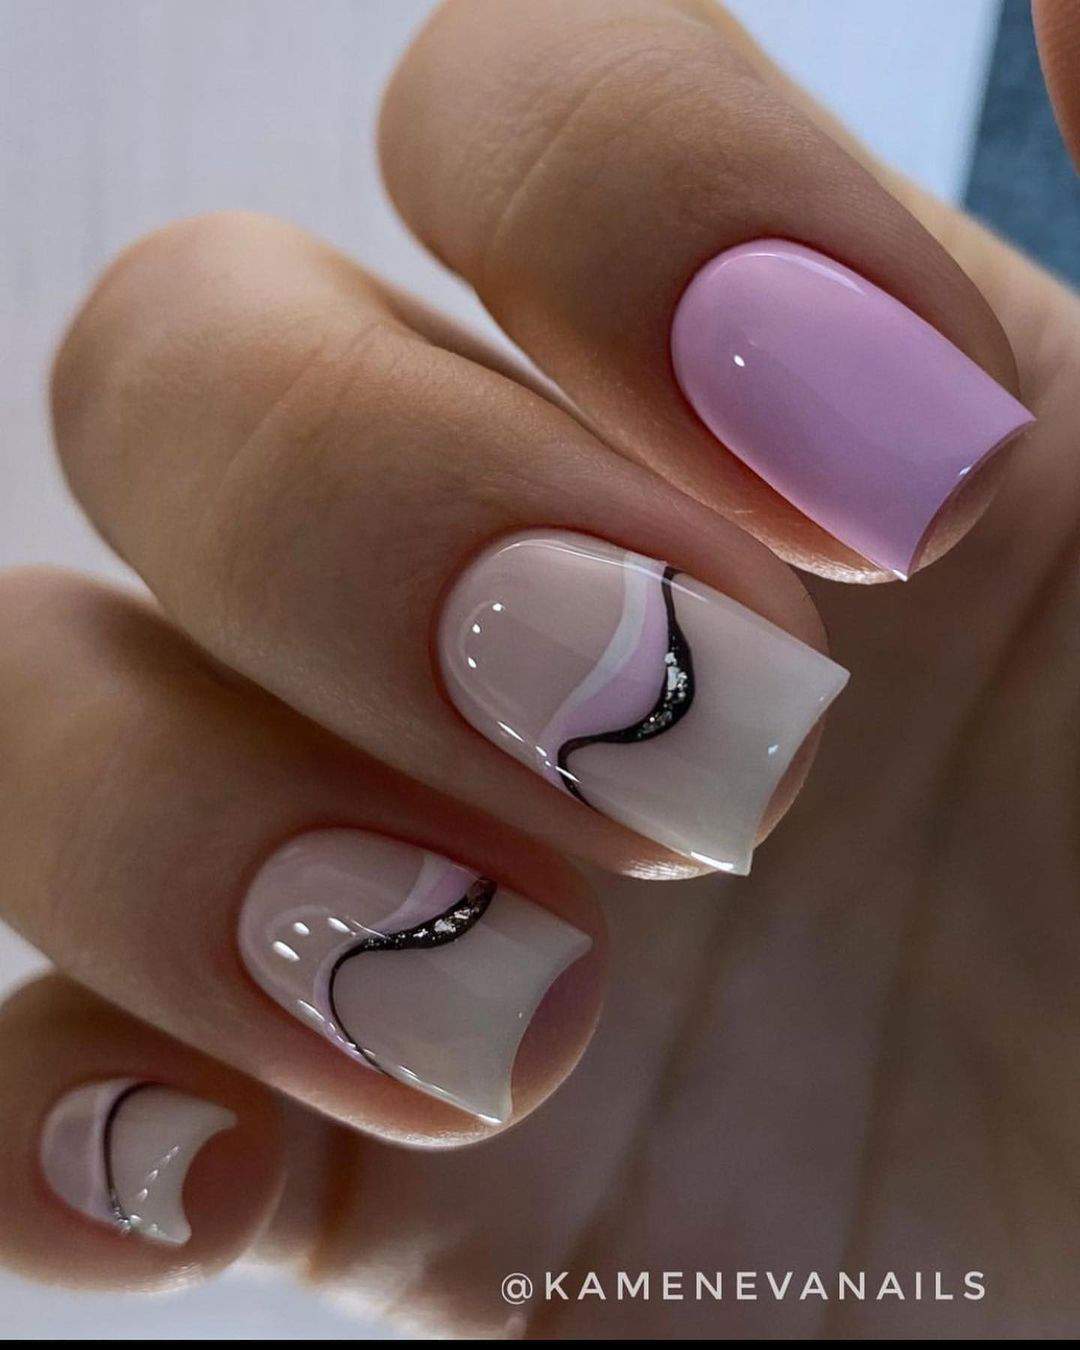 50 Best Nail Designs Trends To Try Out In 2022 images 27